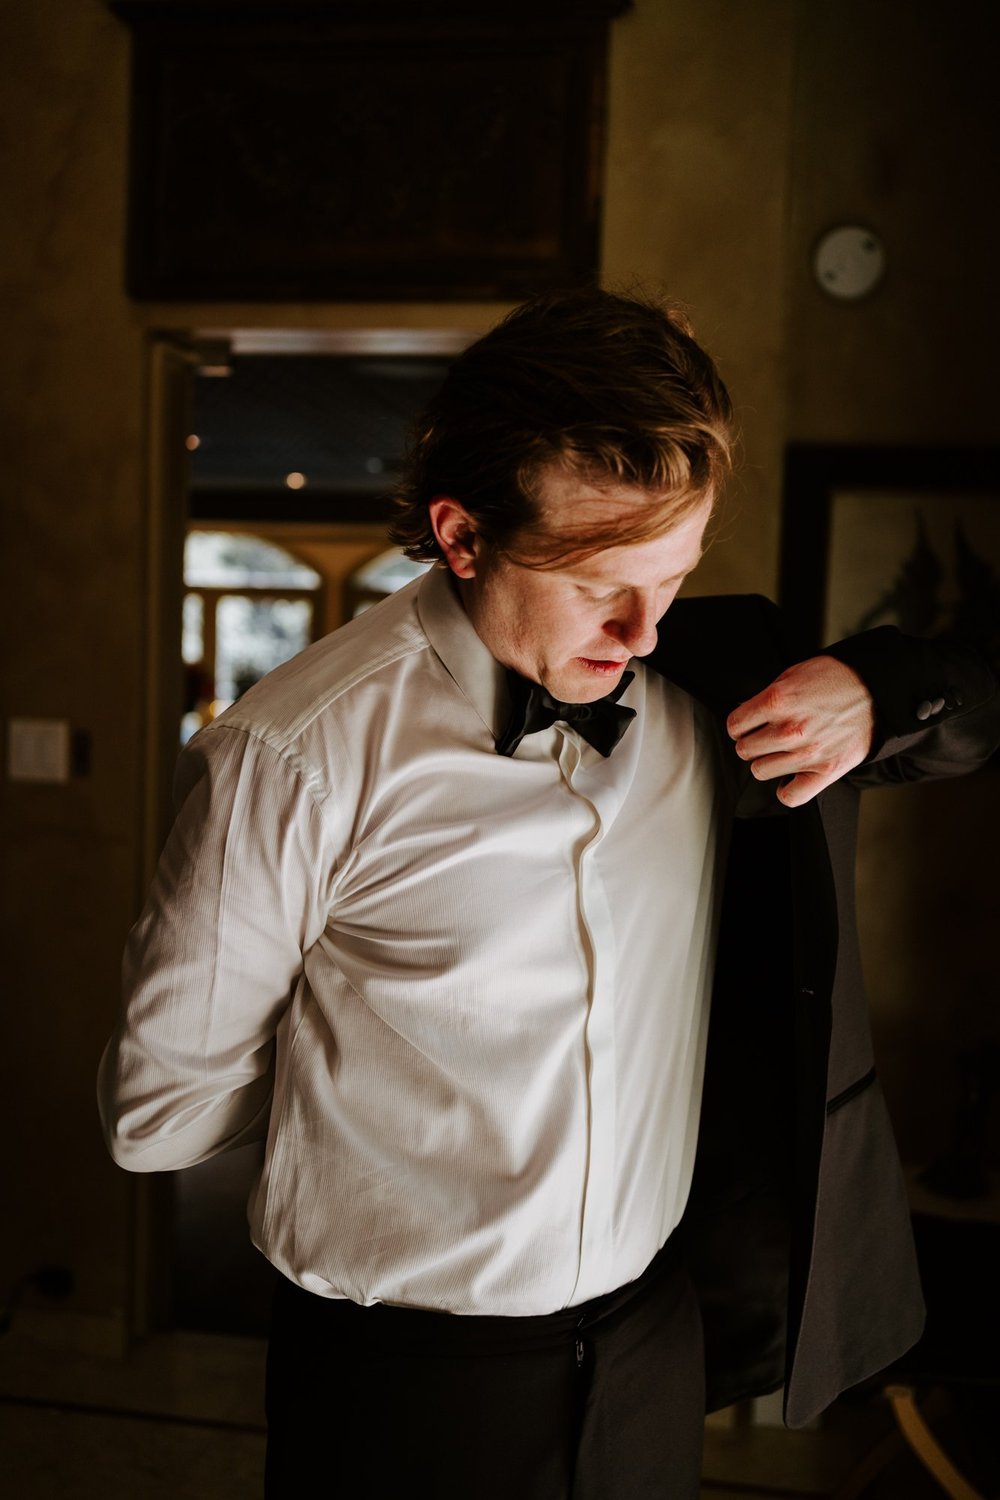 Groom getting ready at The Houdini Estate wedding, Los Angeles wedding photography by Tida Svy